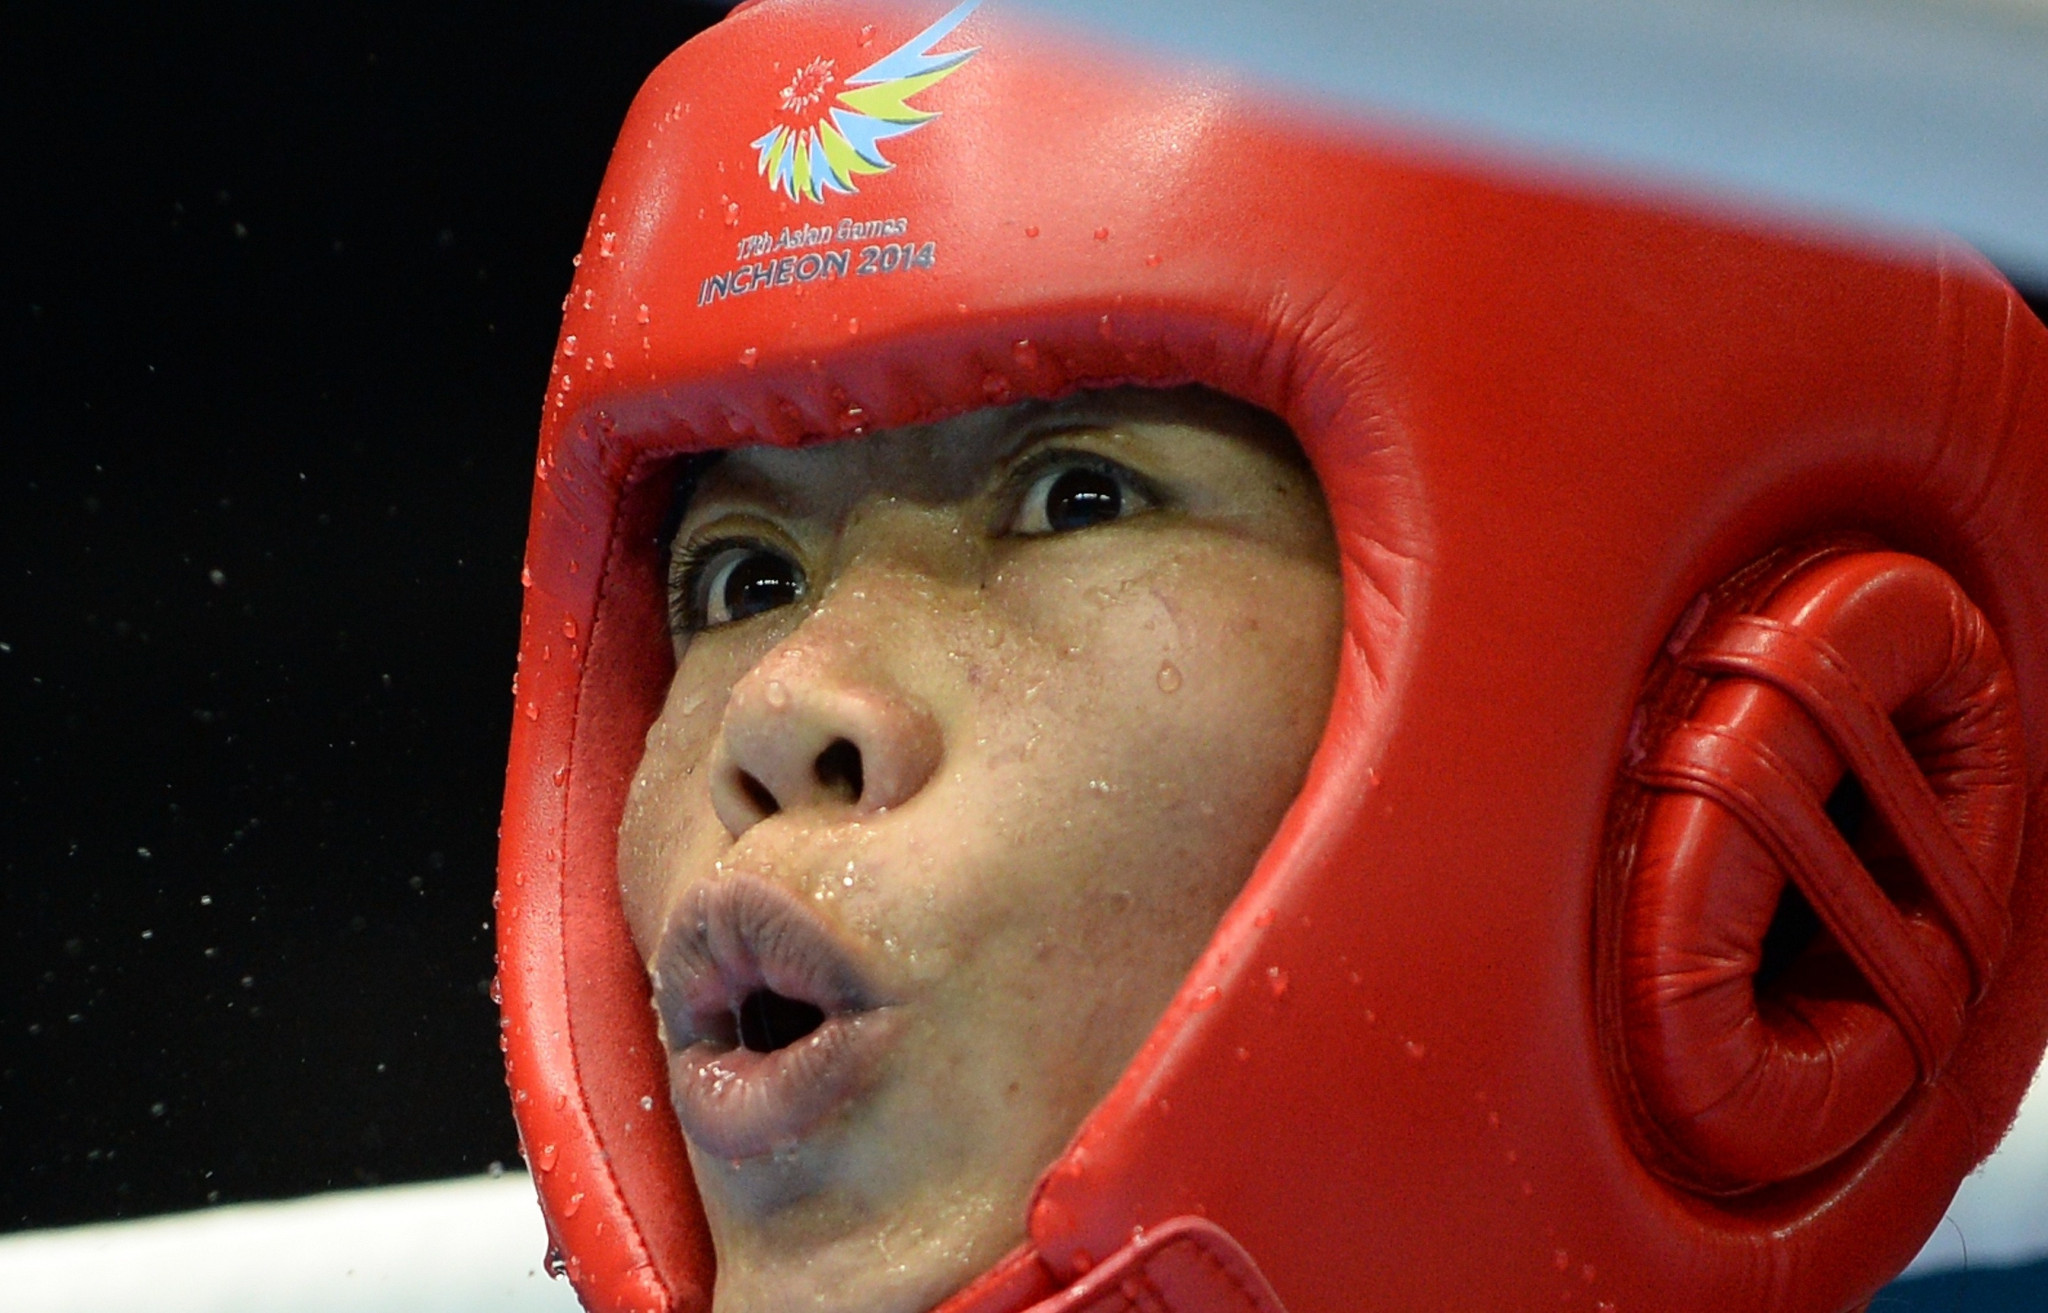 London 2012 Olympic bronze medallist Mary Kom of India has today progressed through to the light flyweight semi-finals at the Asian Women's Boxing Championships ©Getty Images